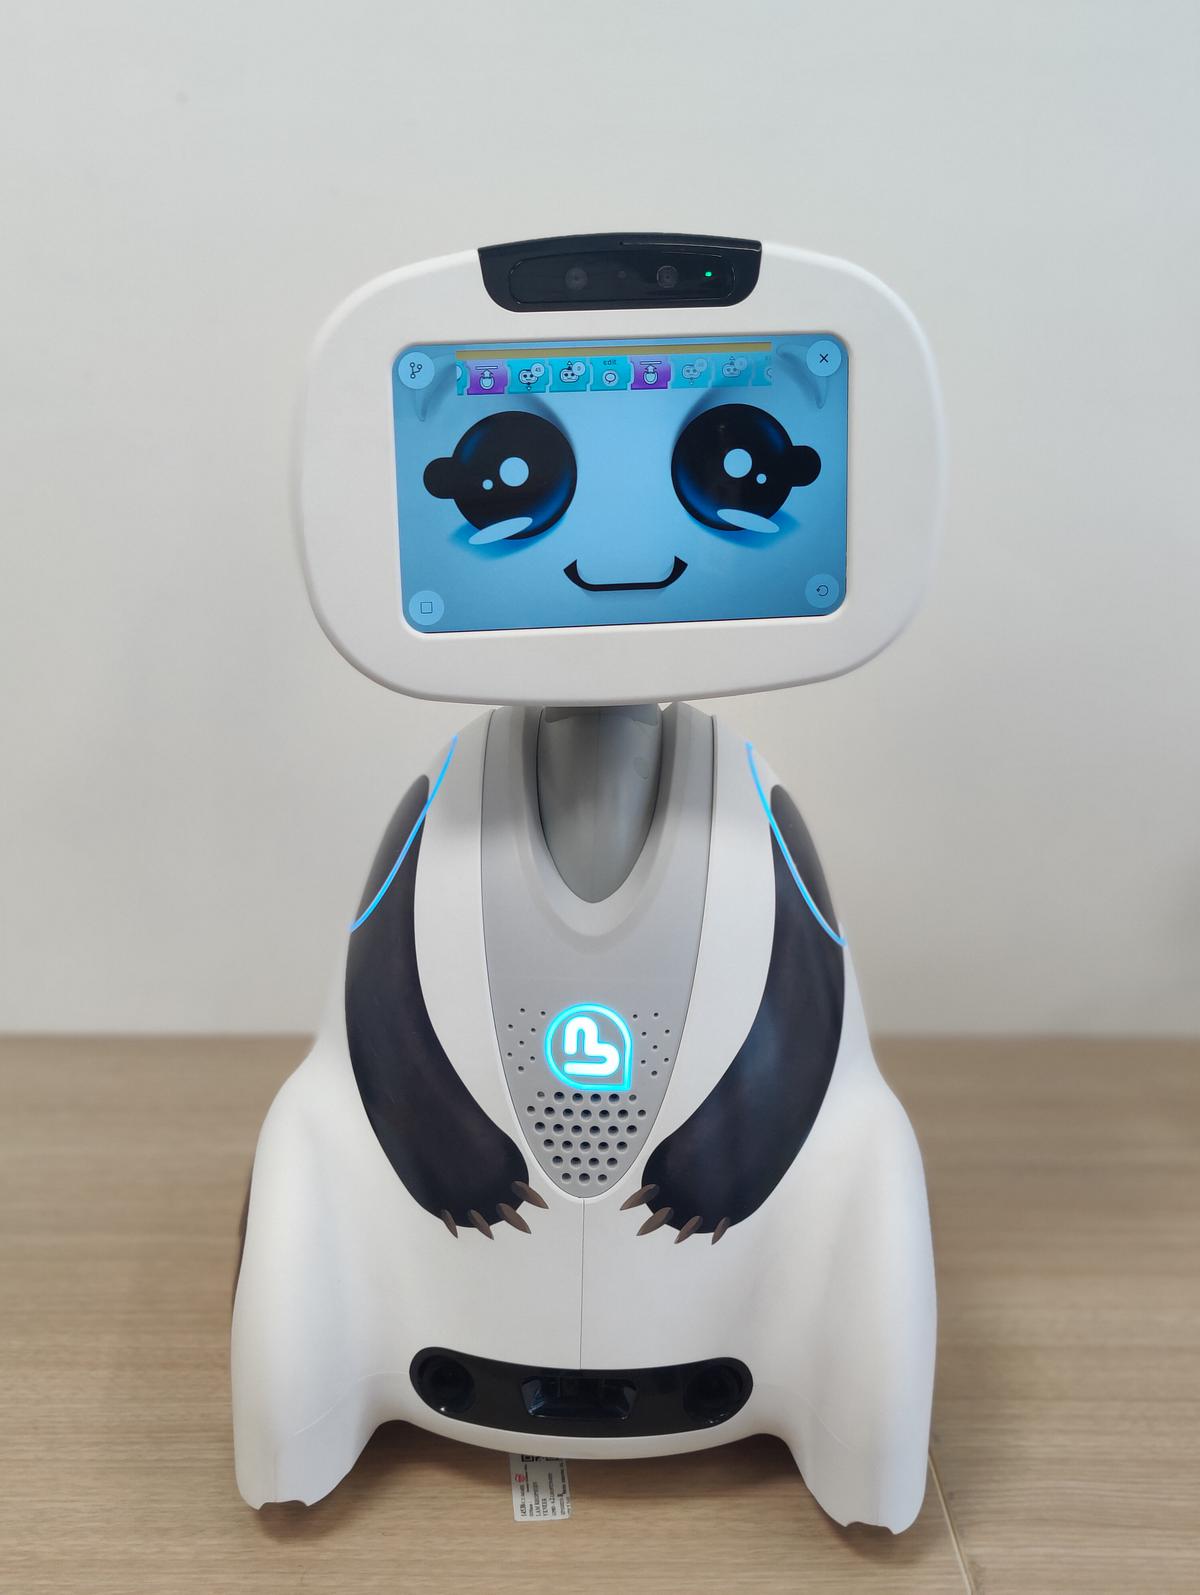 The bot has large affectionate and smiling eyes that give a tactile quality to human exchanges